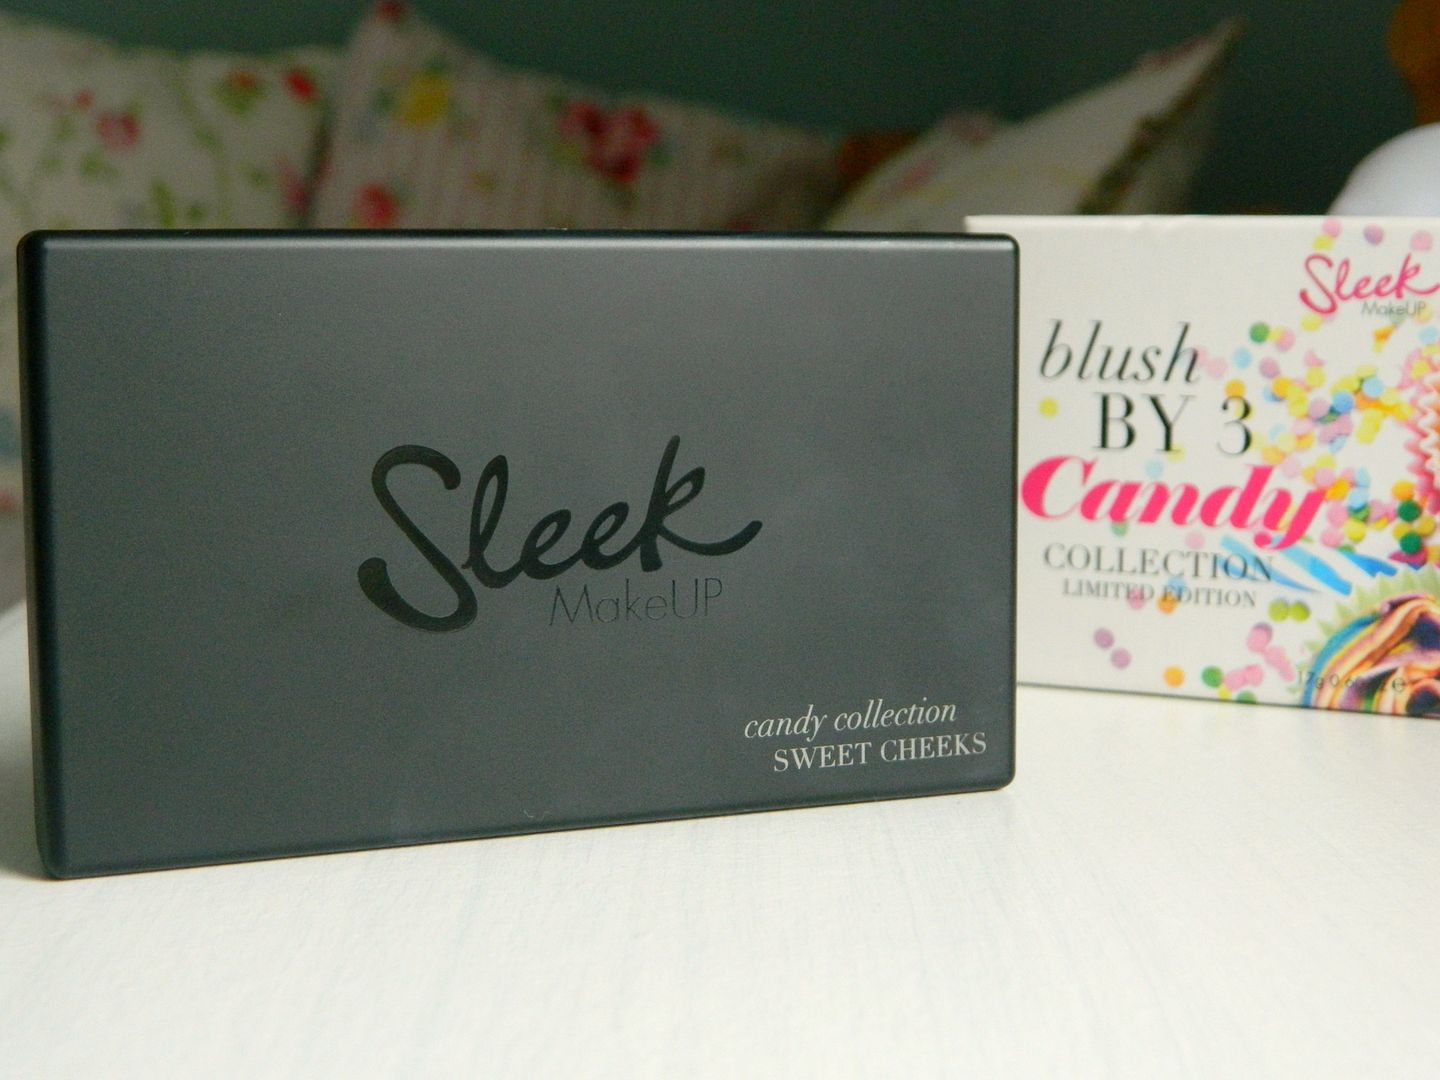 Sleek Blush By 3 in Sweet Cheeks Candy Collection Palette Packaging Review Belle-amie